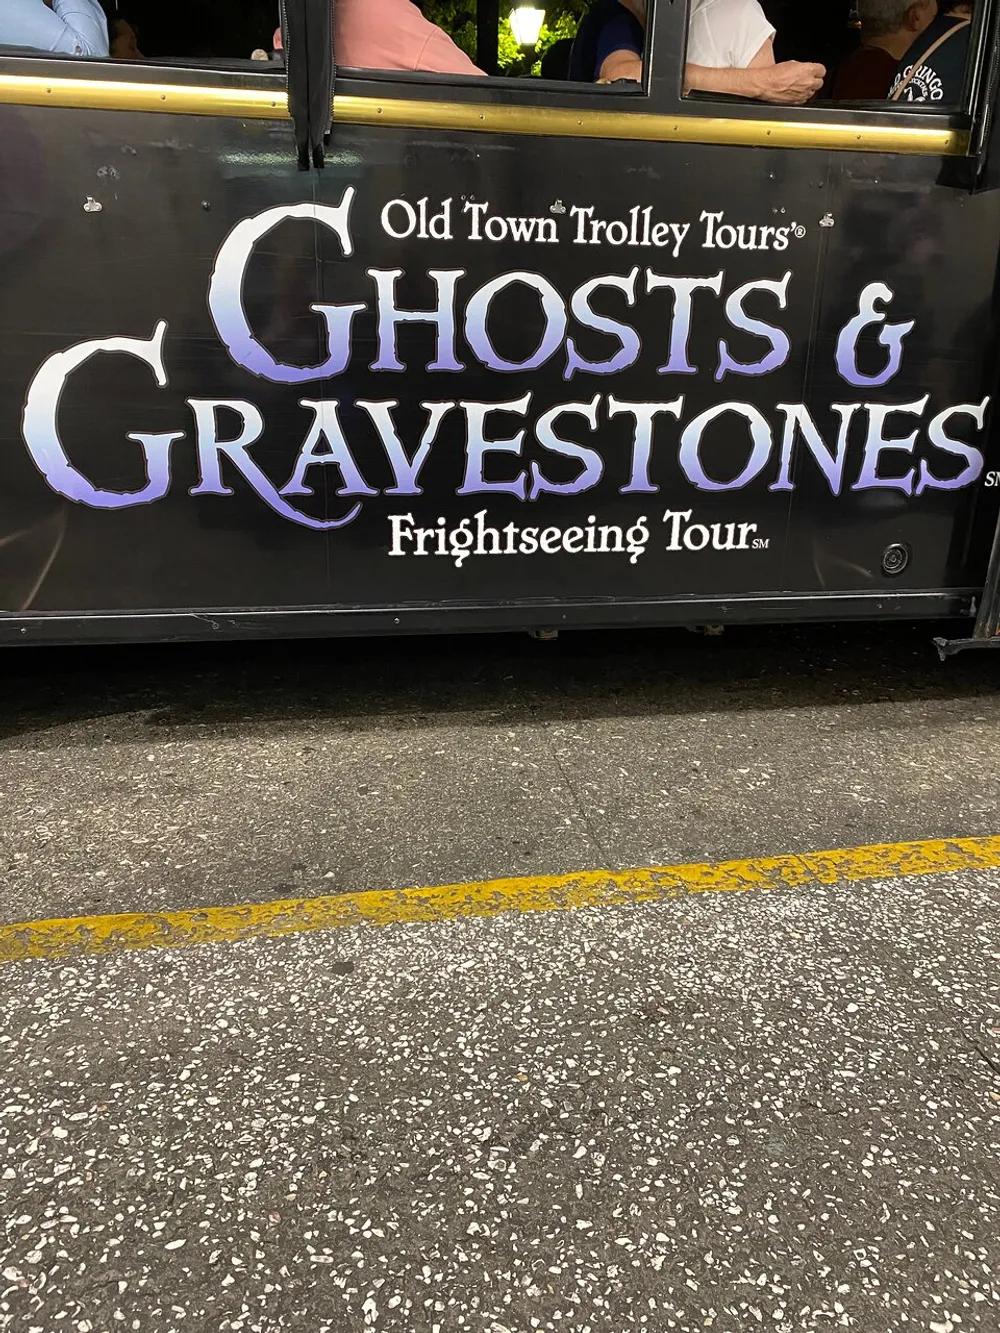 The image shows the side panel of a trolley tour vehicle advertising the Old Town Trolley Tours featuring Ghosts  Gravestones with a Frightseeing Tour tagline suggesting a themed sightseeing experience focused on haunted locales